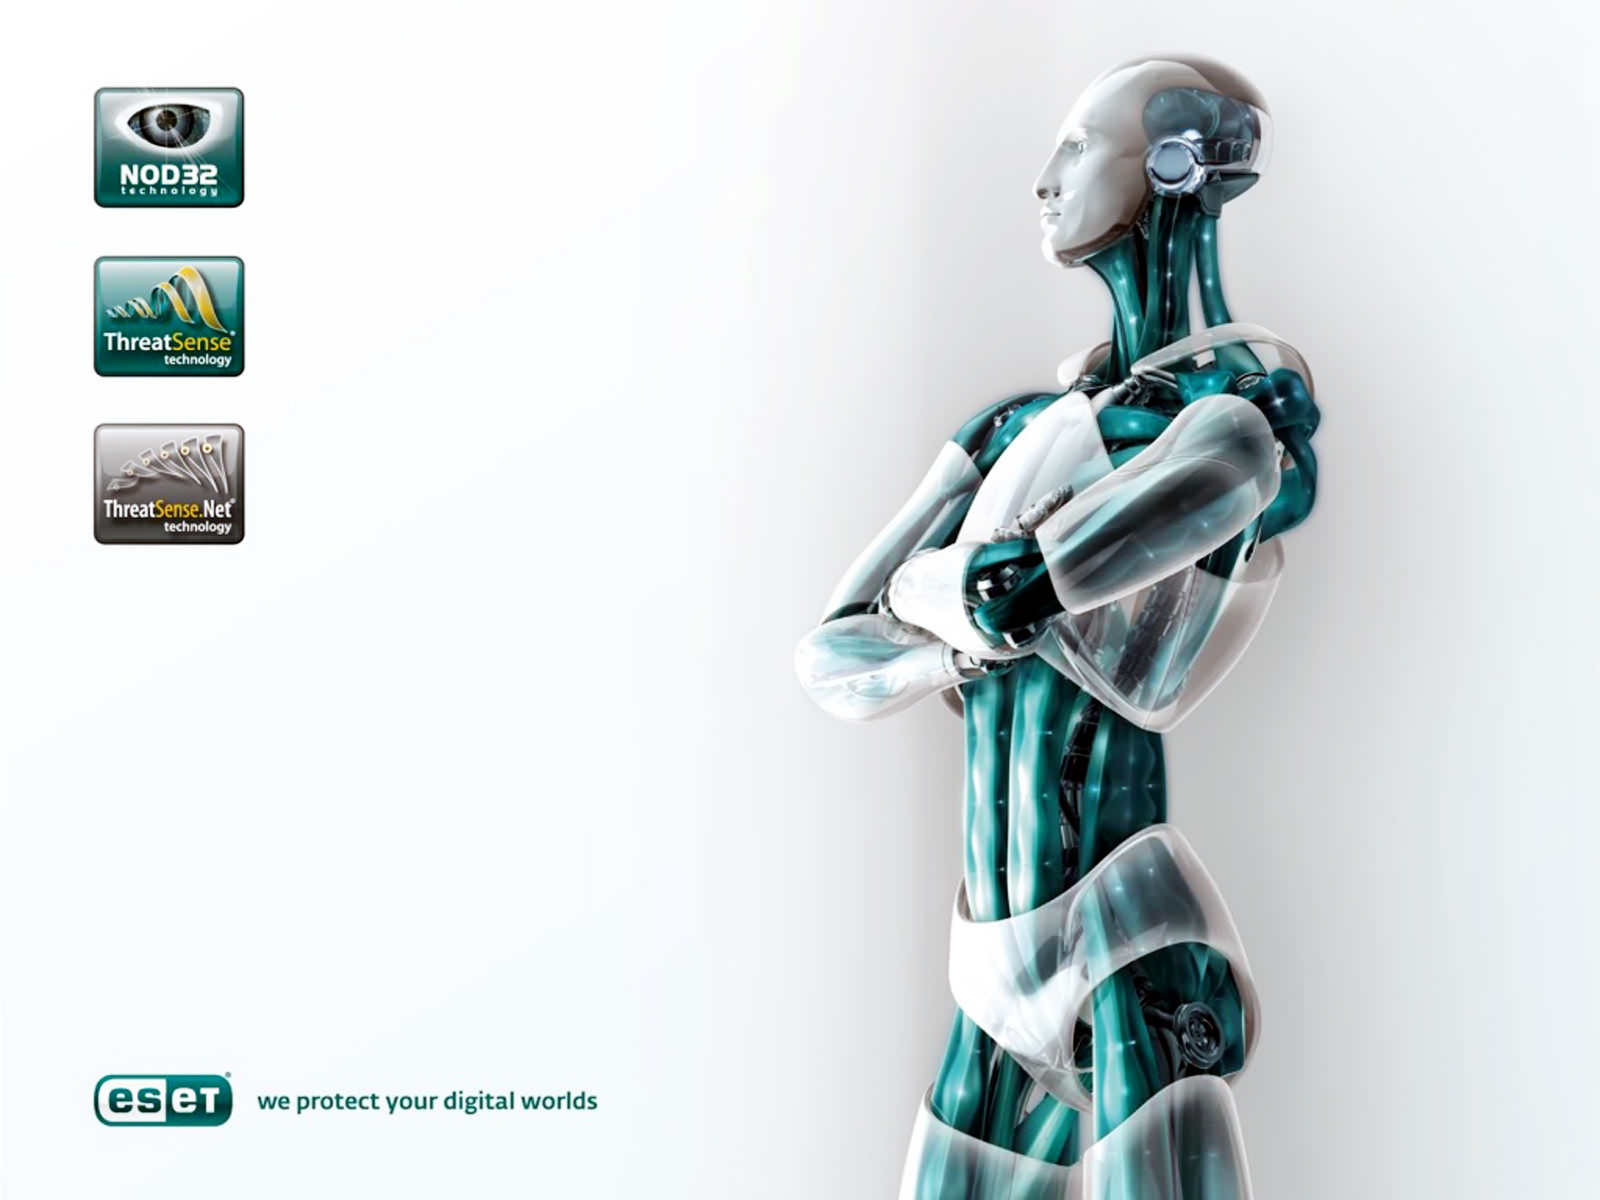 ESET - Tablet wallpaper? Here you are : Resolution 1280x800px | Facebook